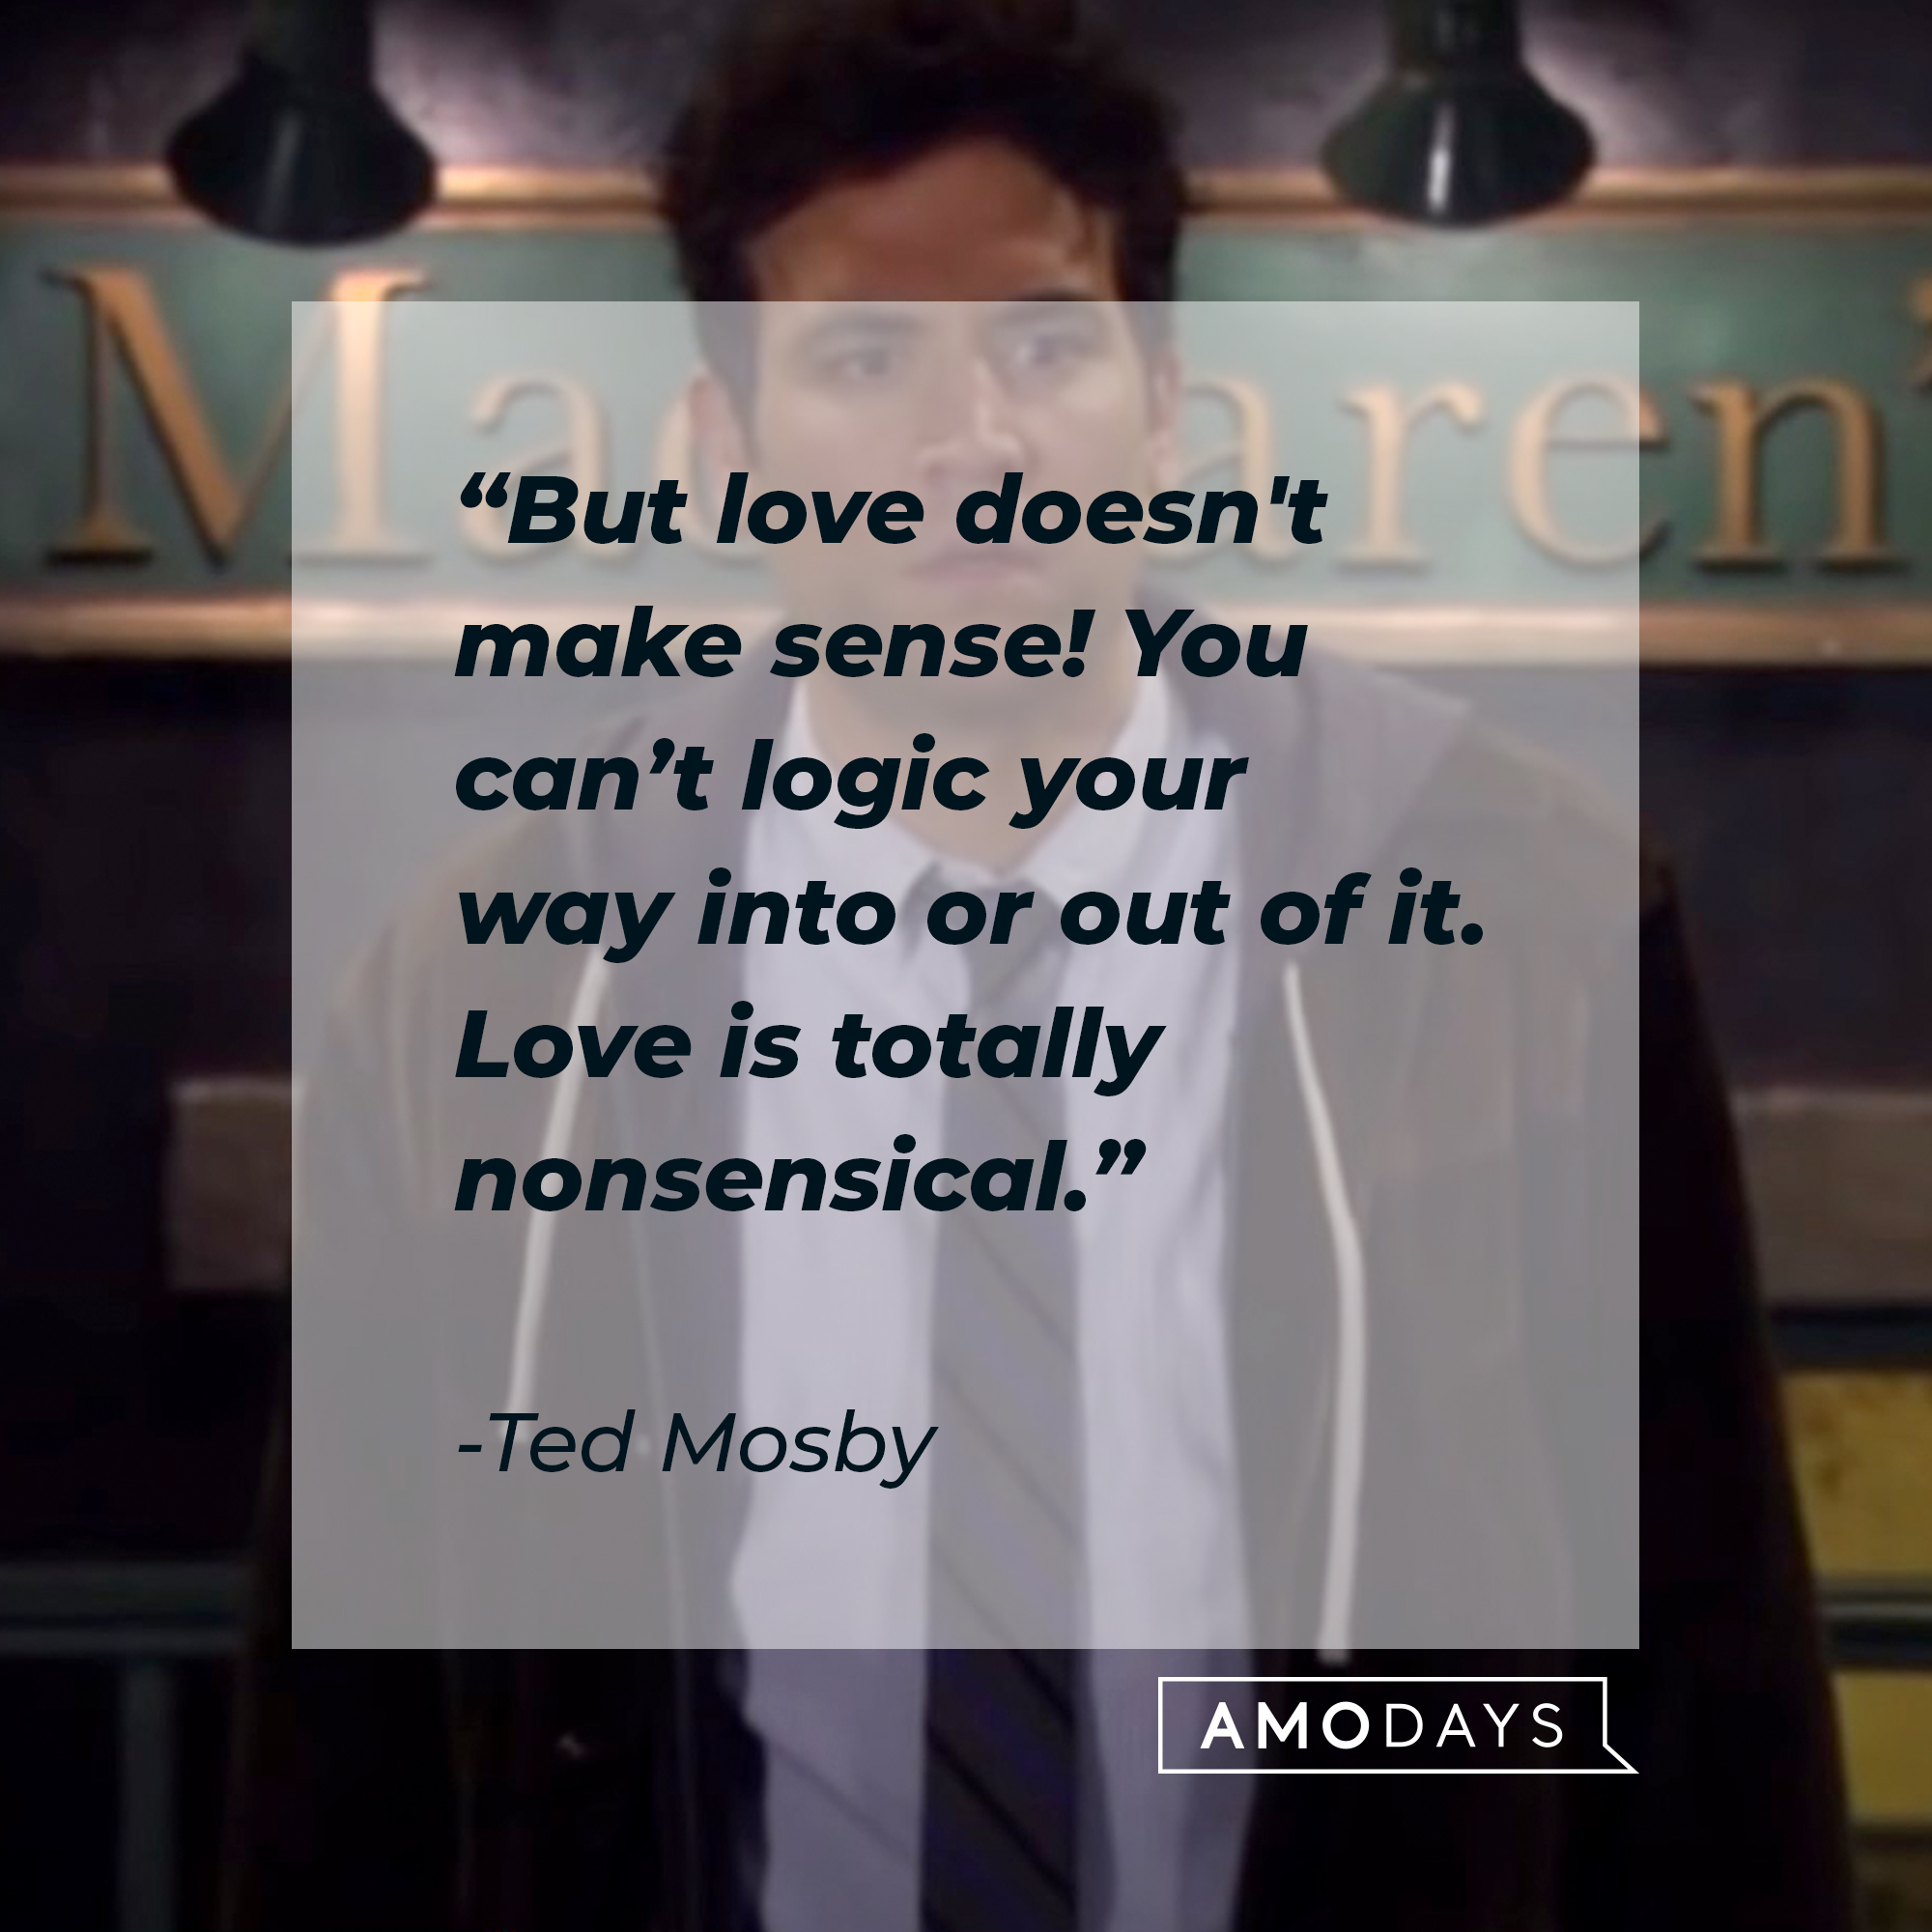 An image of Ted Mosby with his quote: “But love doesn’t make sense! You can’t logic your way into or out of it. Love is totally nonsensical." | Source: facebook.com/OfficialHowIMetYourMother